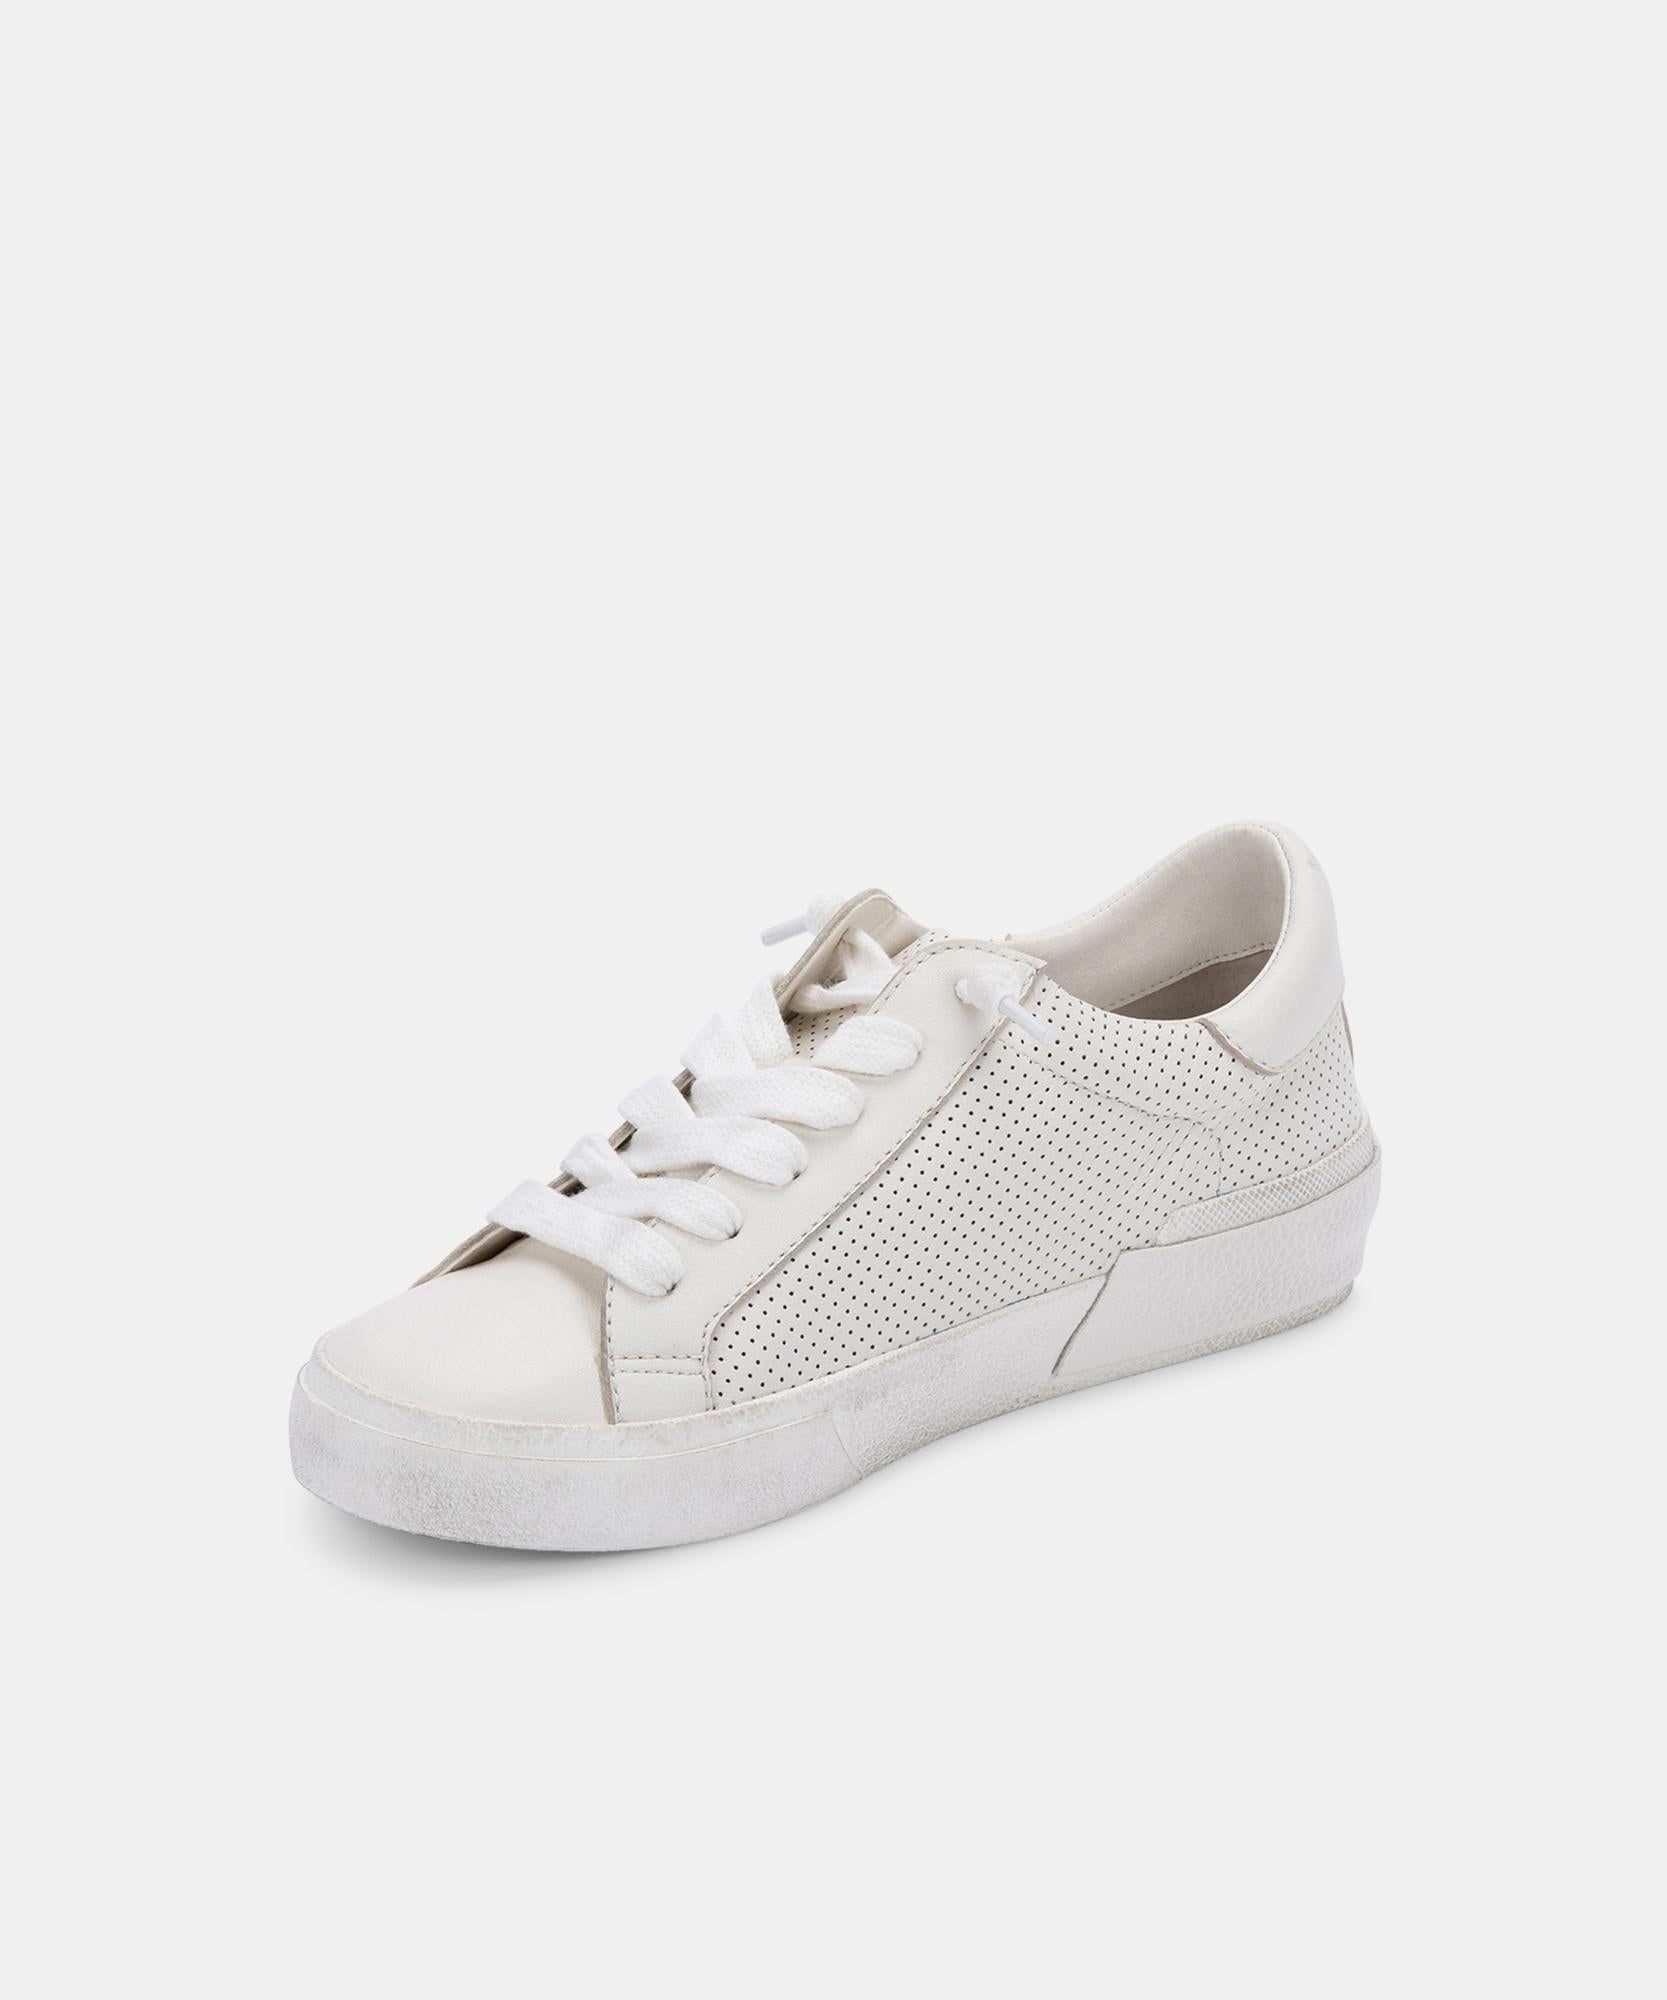 ZINA SNEAKERS WHITE PERFORATED LEATHER – Dolce Vita